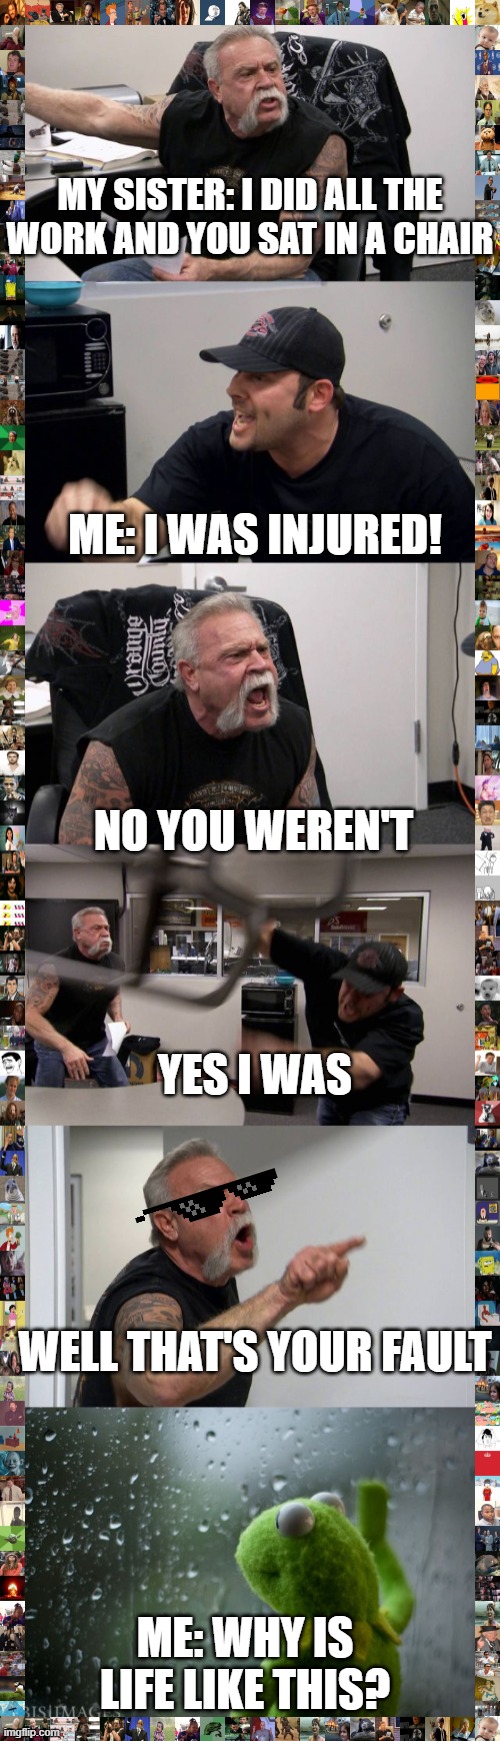 my sister and I | MY SISTER: I DID ALL THE WORK AND YOU SAT IN A CHAIR; ME: I WAS INJURED! NO YOU WEREN'T; YES I WAS; WELL THAT'S YOUR FAULT; ME: WHY IS LIFE LIKE THIS? | image tagged in kermit window,memes,american chopper argument | made w/ Imgflip meme maker